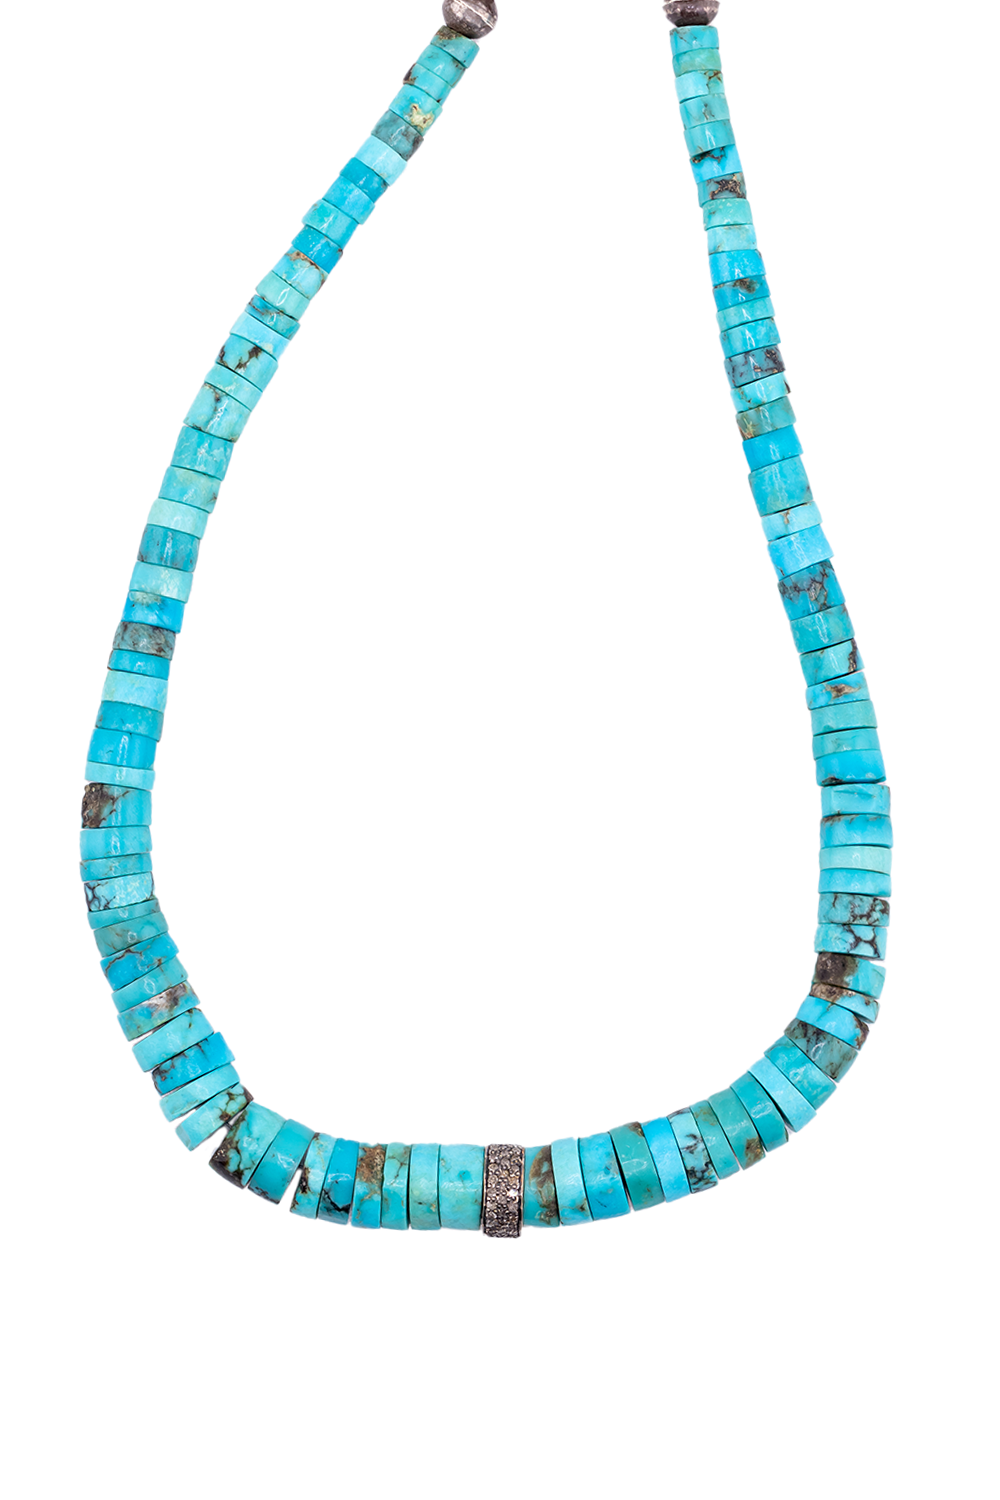 Old Pueblo Turquoise with Large Diamond Bead Necklace